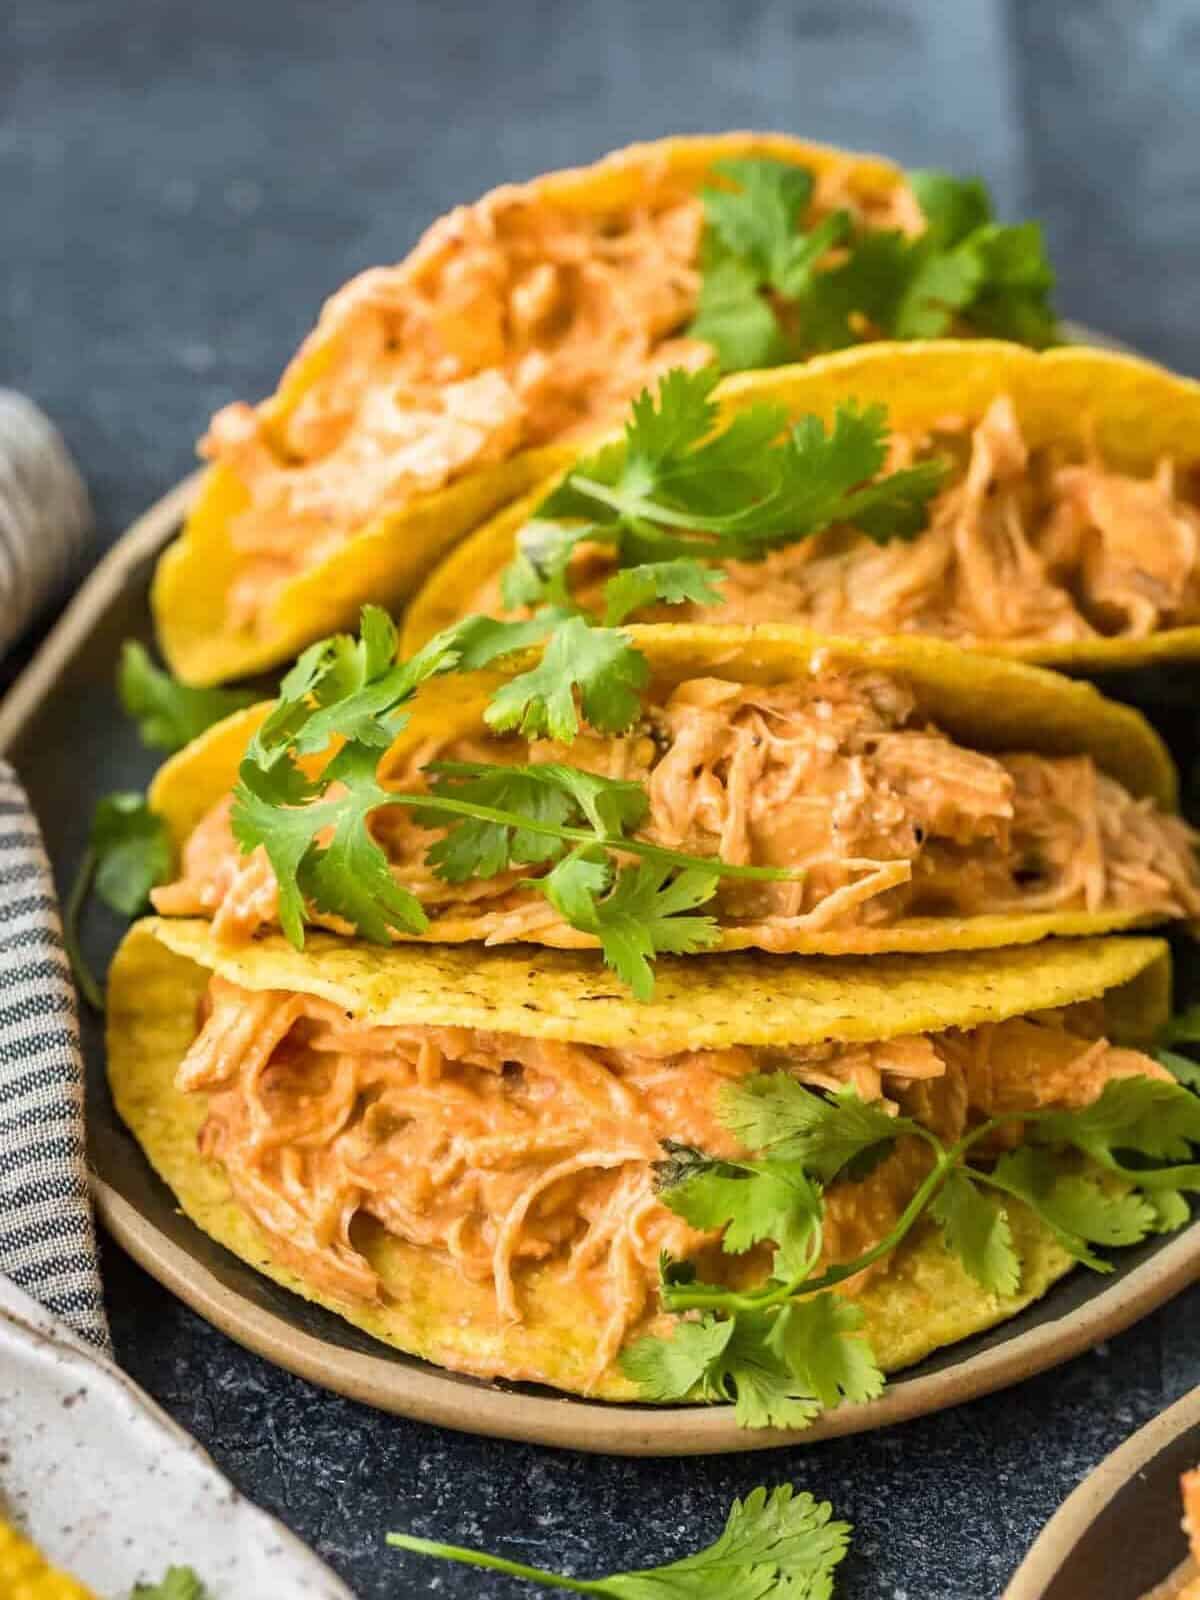 Four chicken tacos on a serving plate